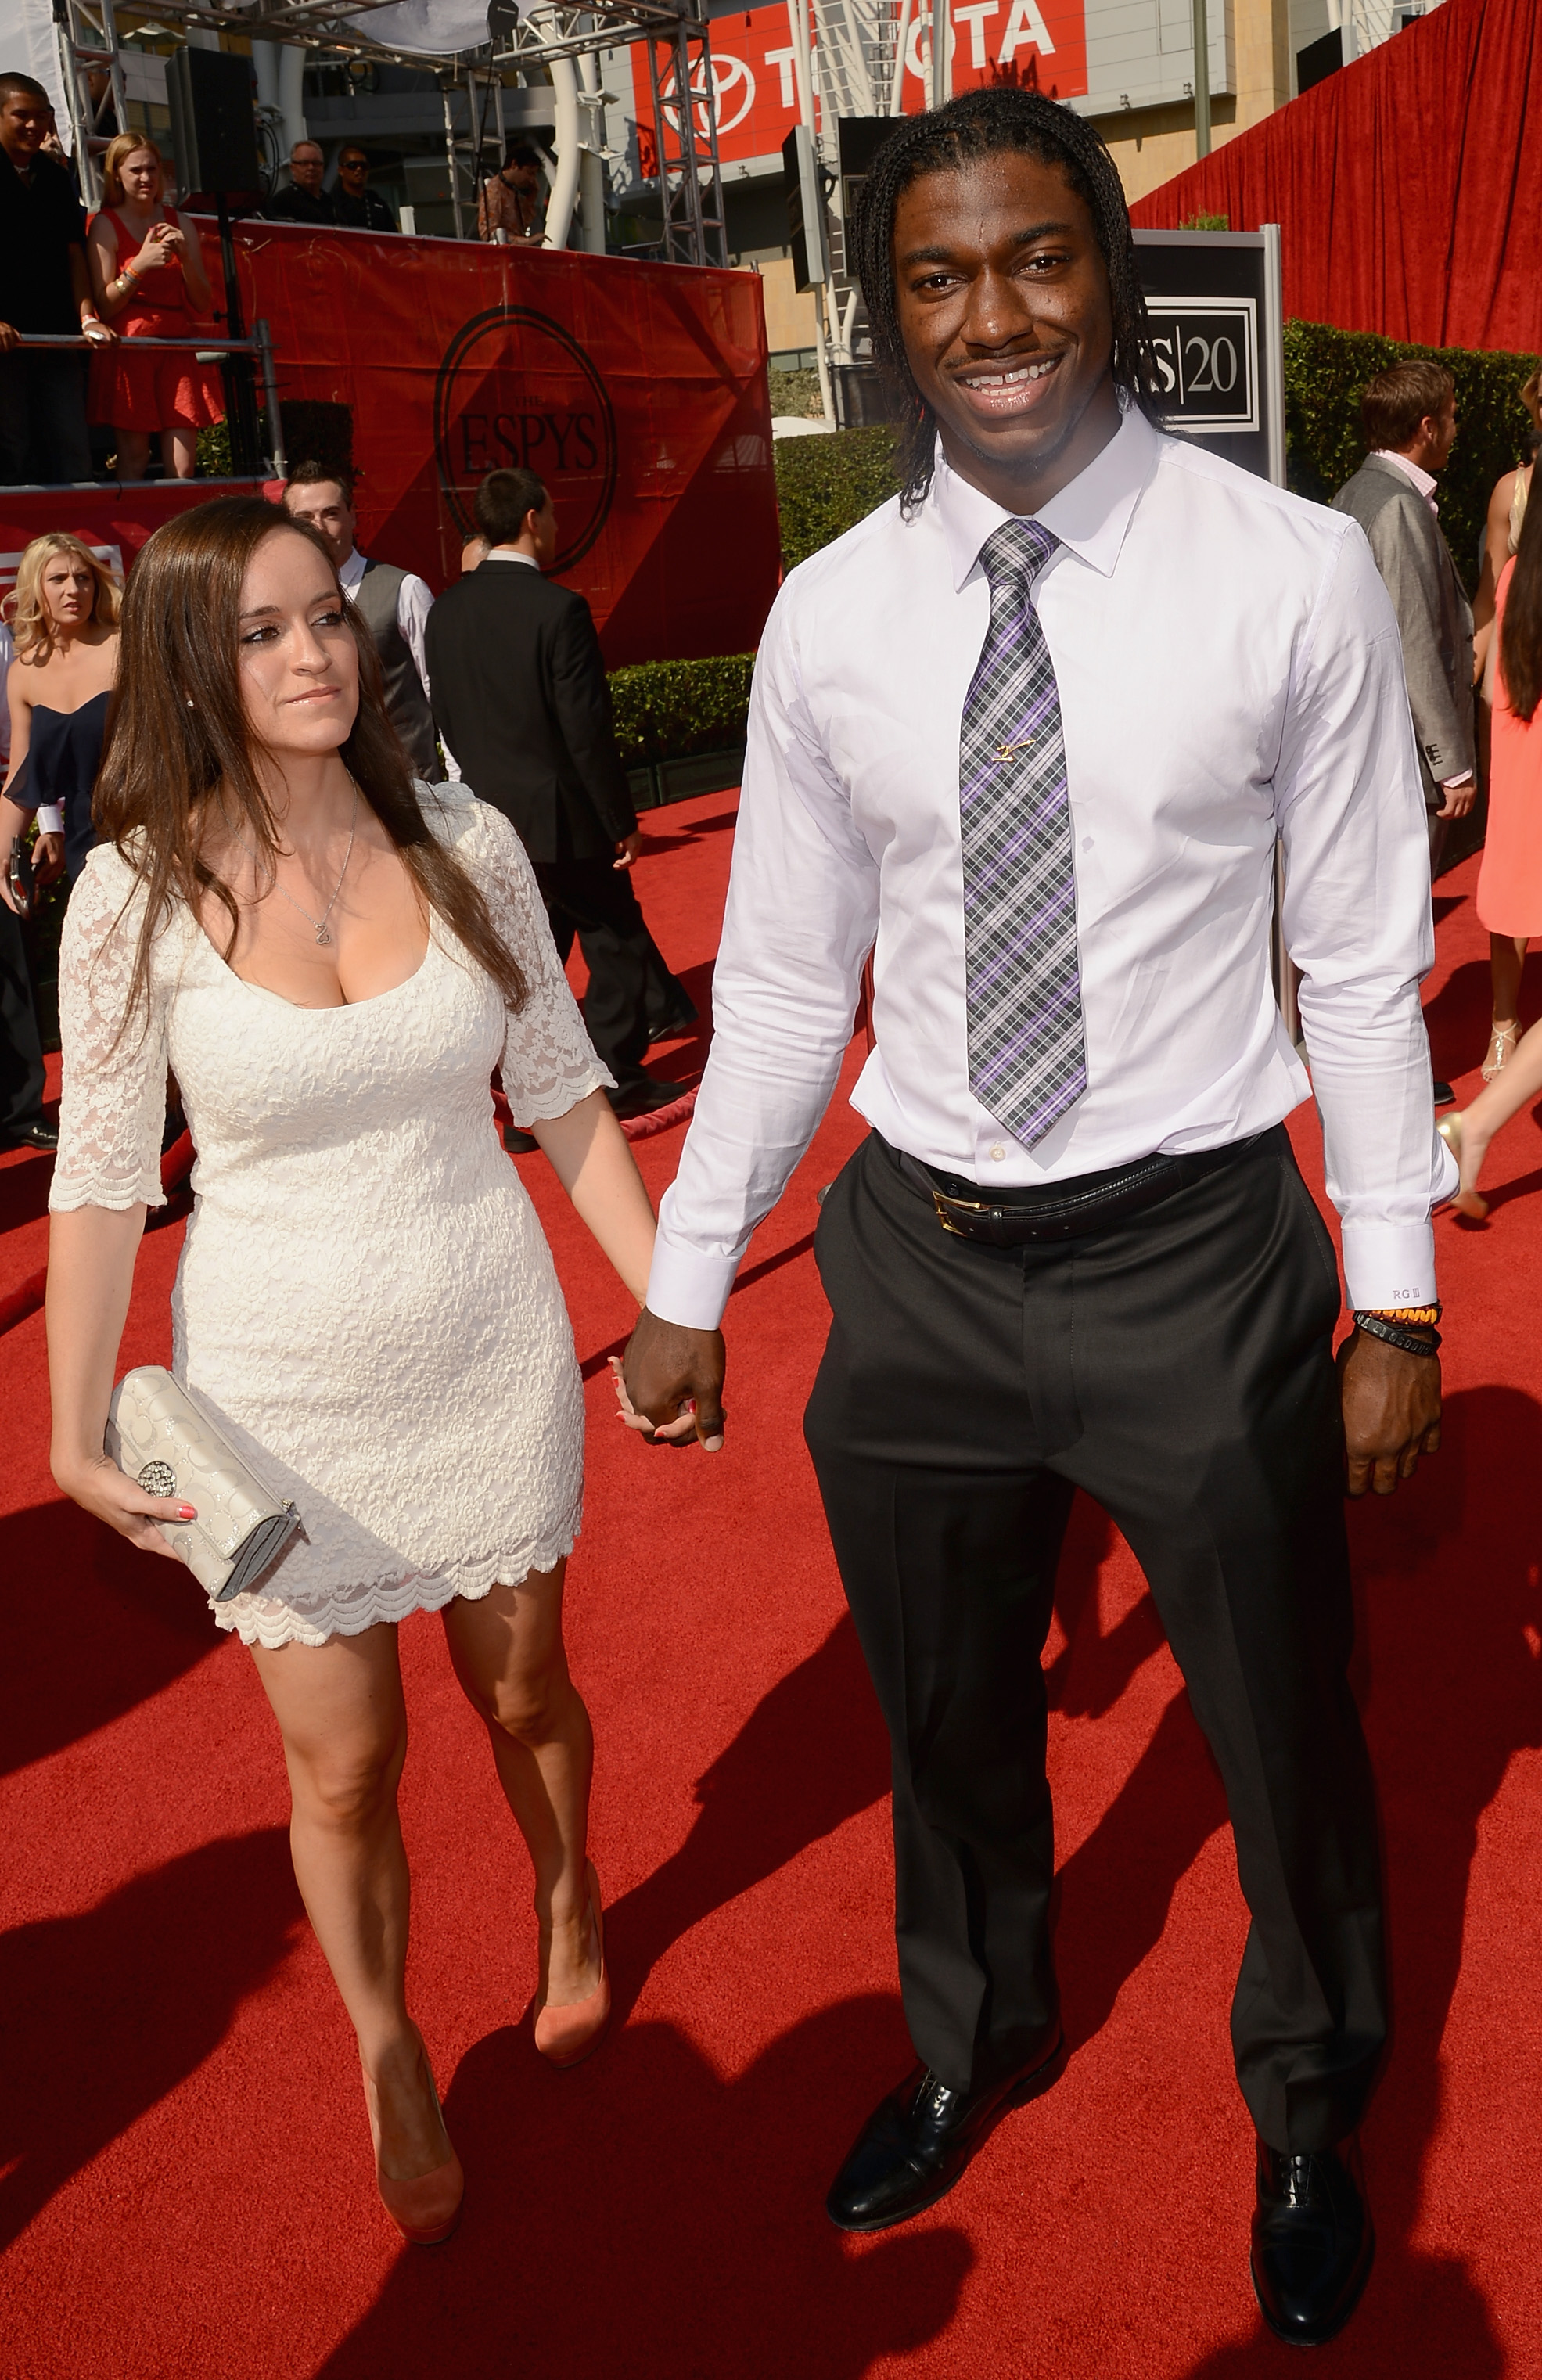 Robert Griffin III and Rebecca Liddicoat at the 2012 ESPY Awards on July 11, 2012 in Los Angeles, California. | Source: Getty Images